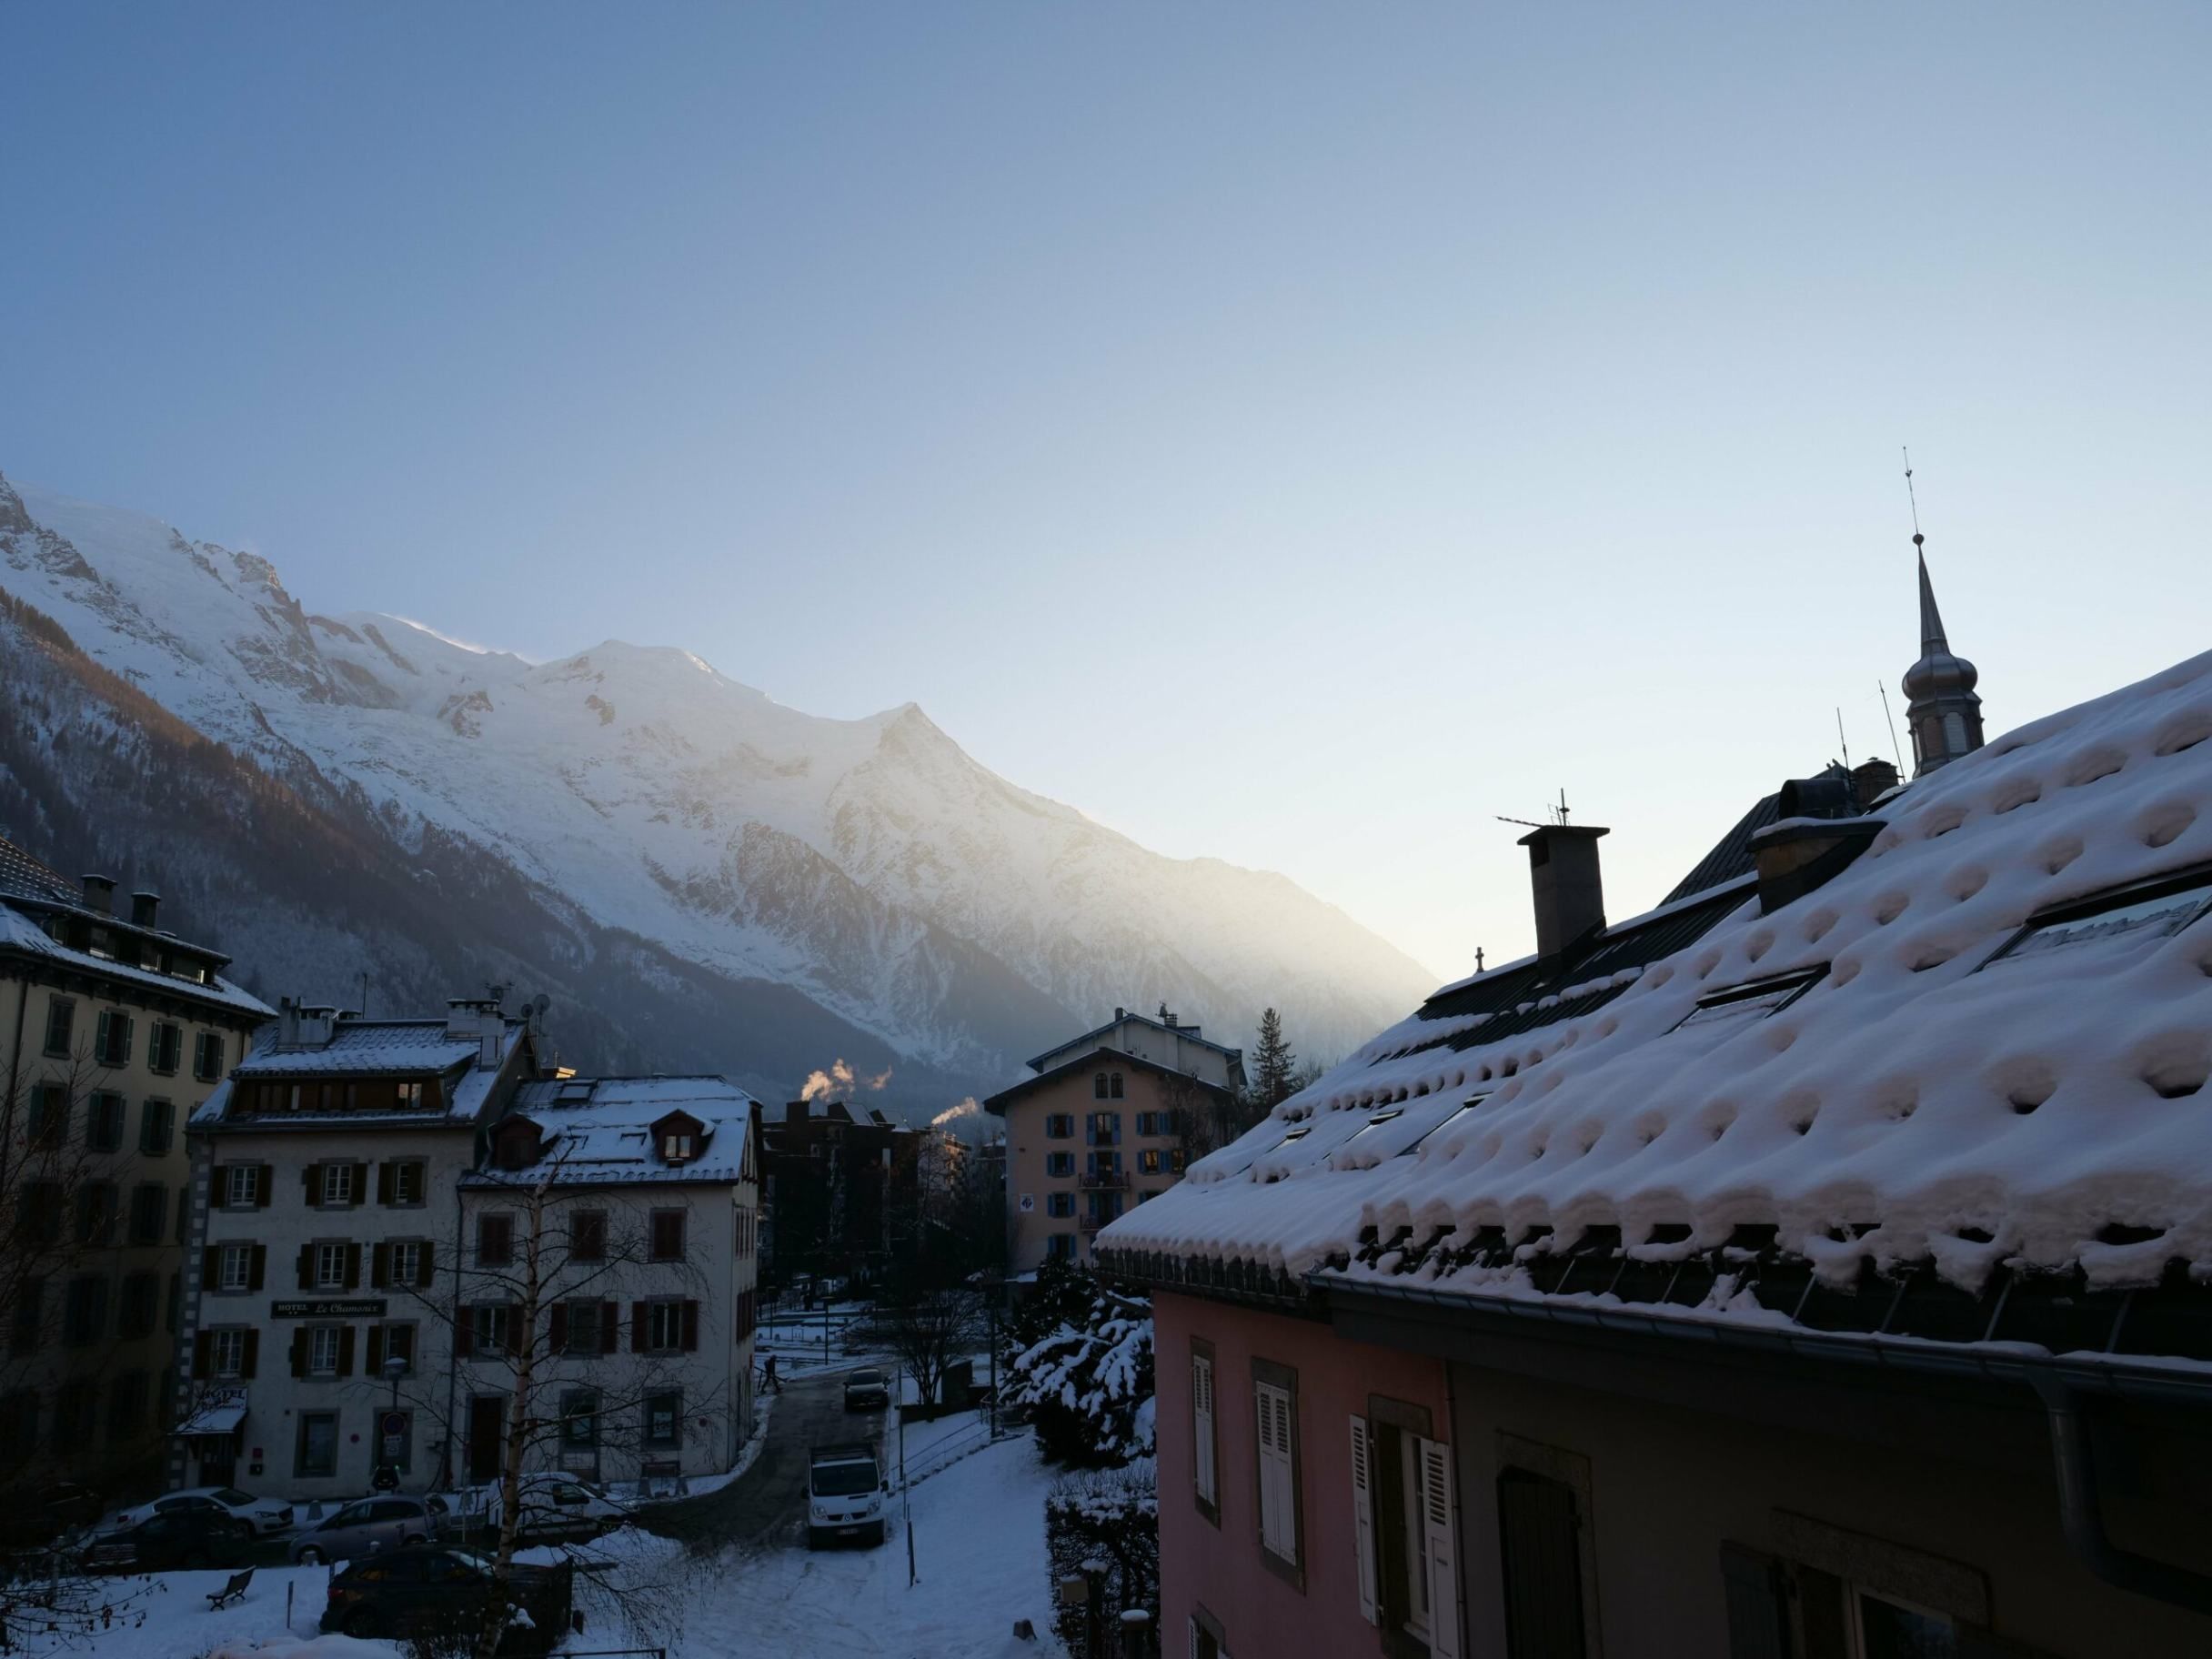 Hotel Faucigny with snow-covered roofs and views of Mont Blanc